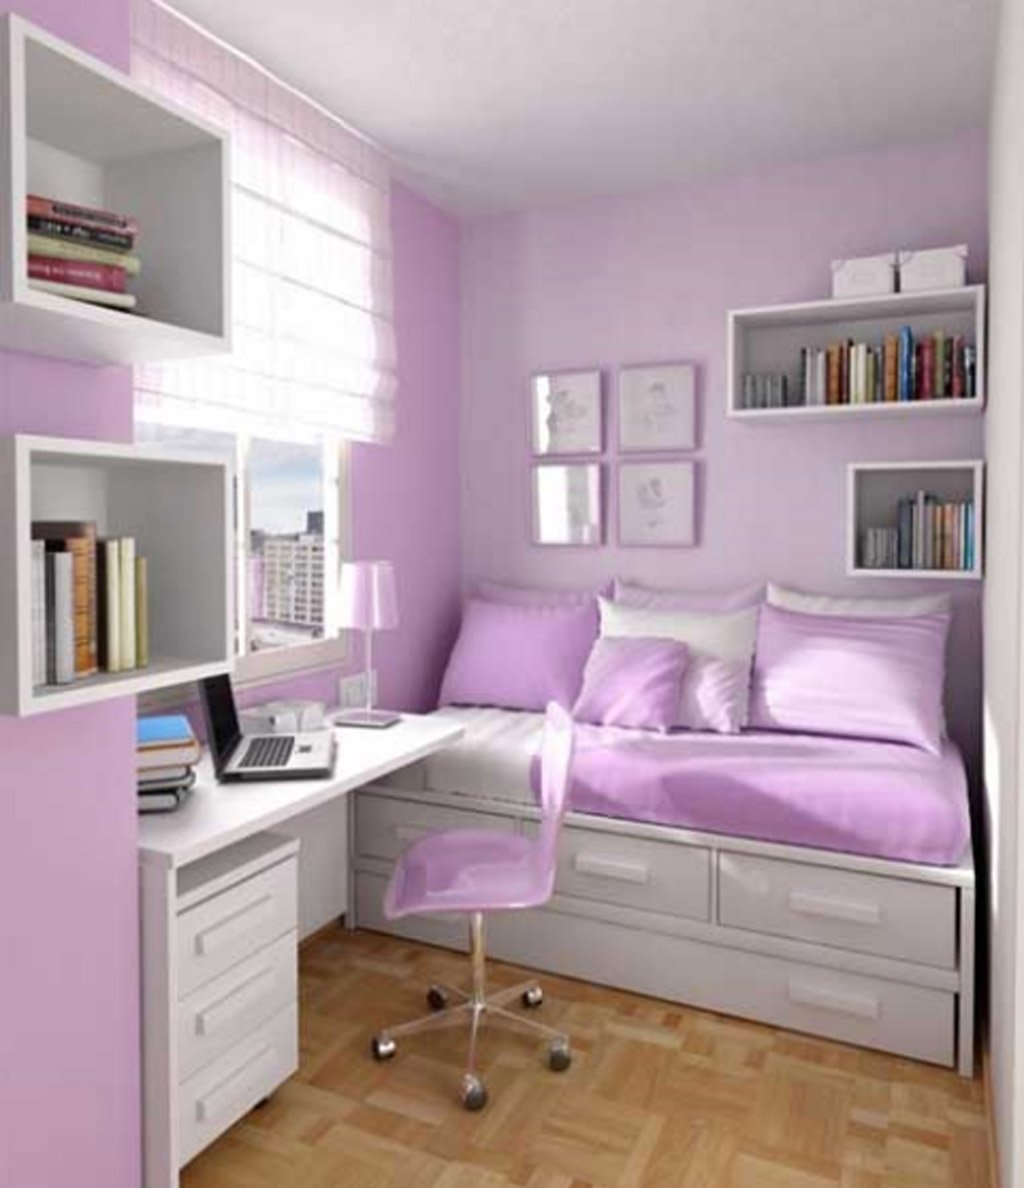 10 Most Recommended Small Bedroom Ideas For Teenage Girls small bedroom ideas for teenage girls home improvement ideas 2023